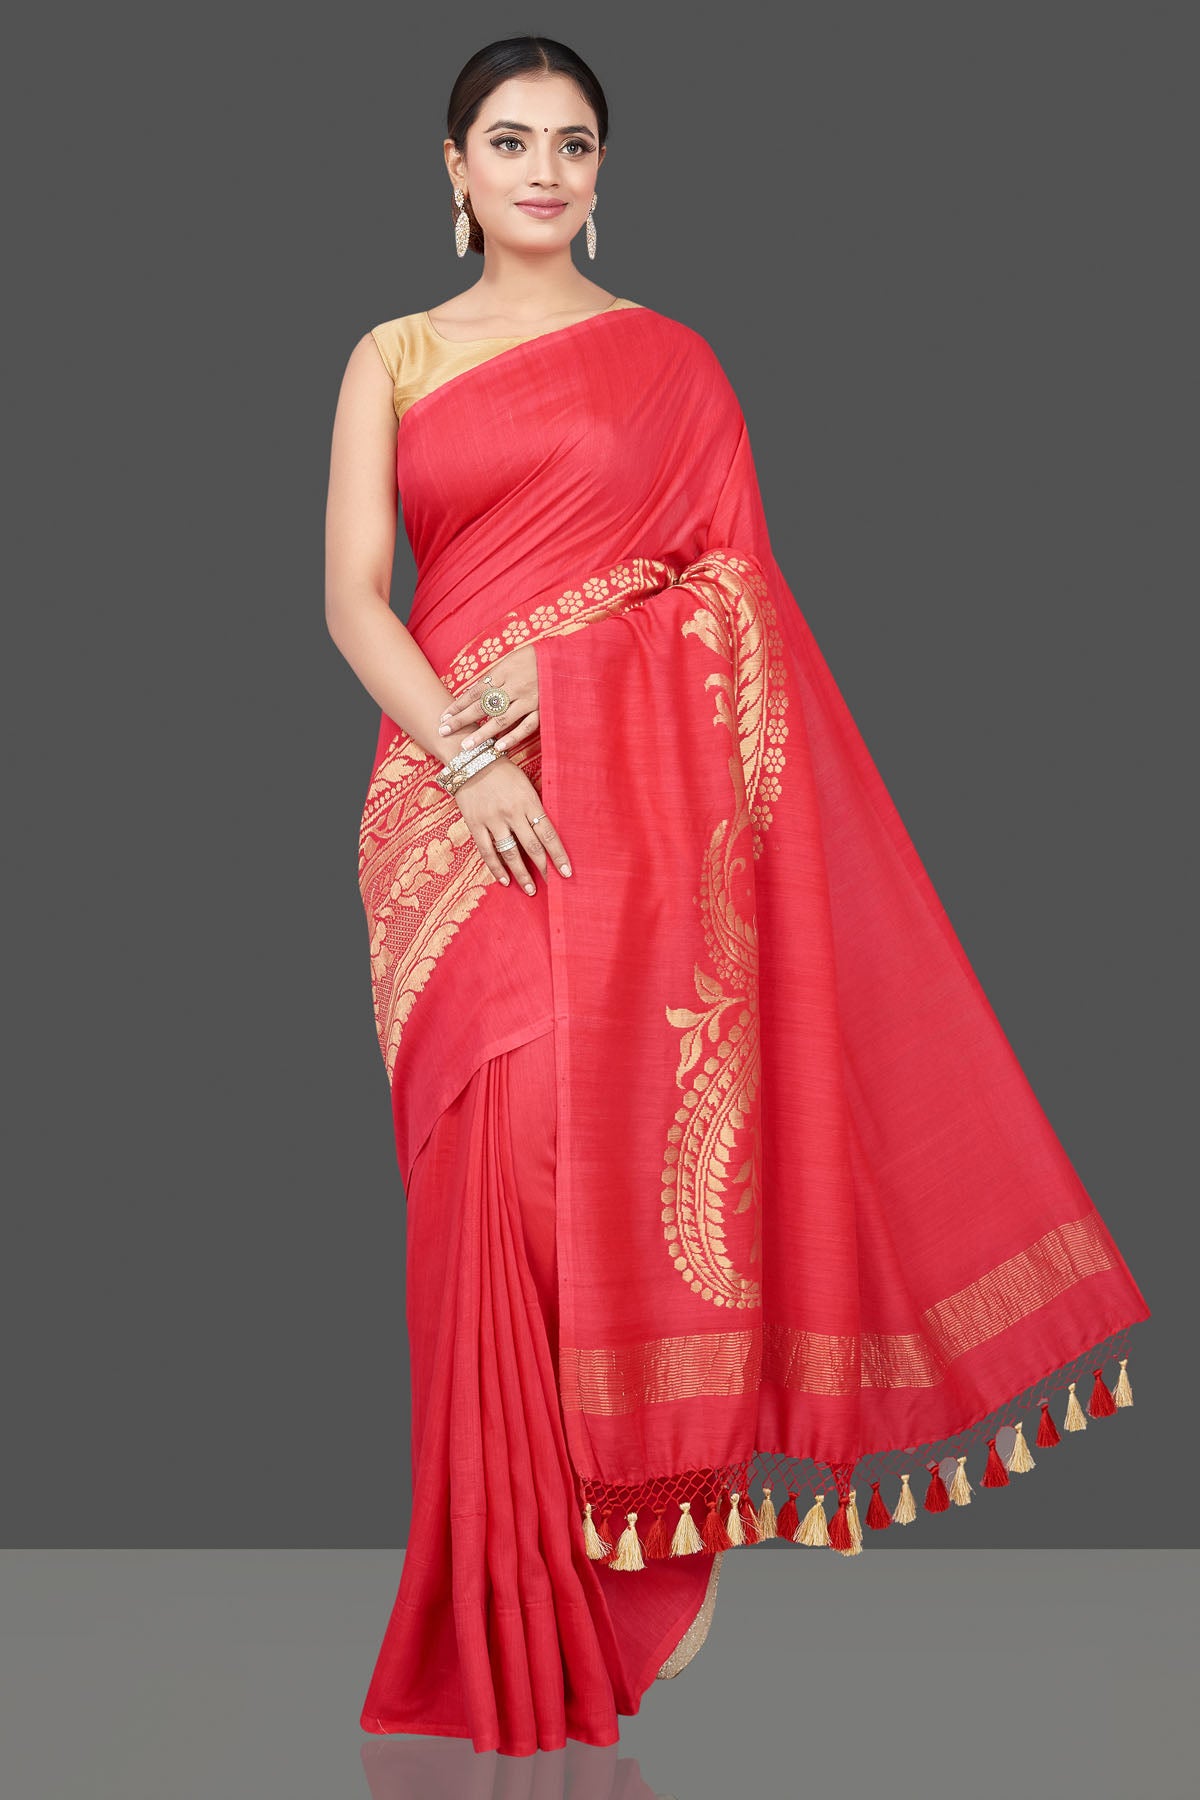 Buy beautiful tomato red Muga Banarasi saree online in USA with zari work. Get your hands on beautiful Indian handloom sarees, pure silk saris, designer sarees, embroidered sarees, Banarasi sarees from Pure Elegance Indian fashion store in USA.-front